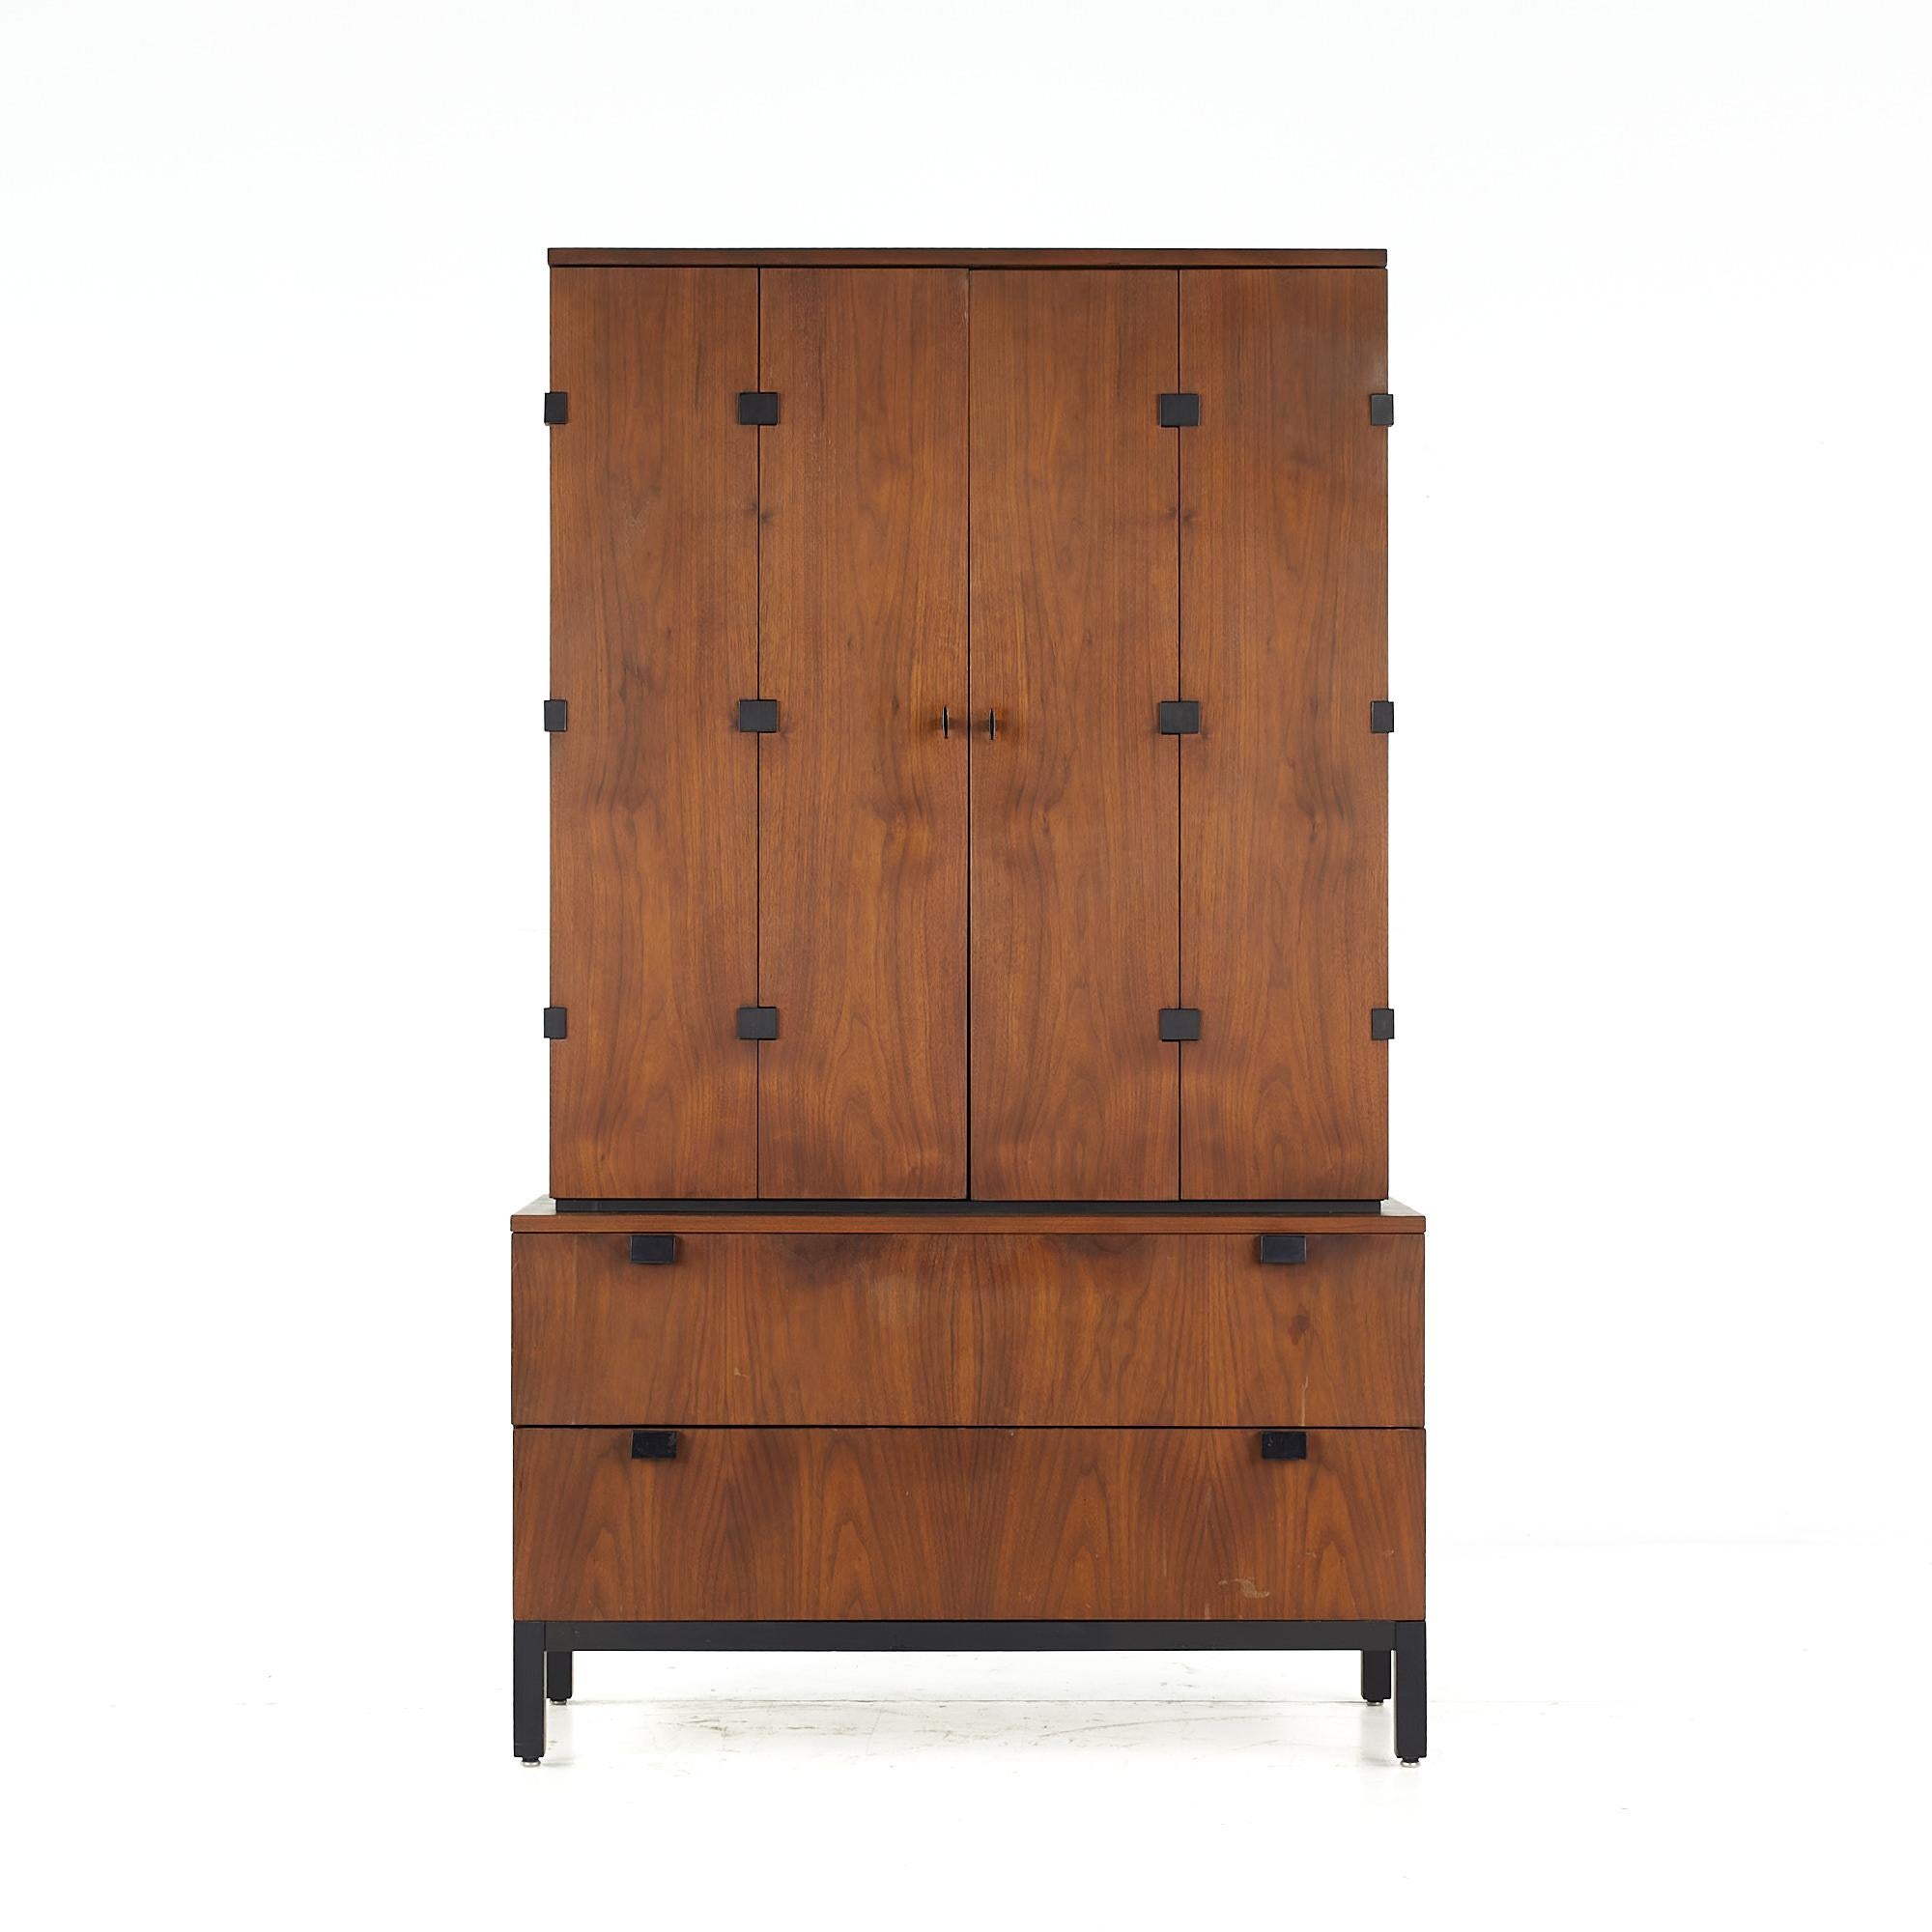 Milo Baughman for Directional mid century walnut highboy armoire

The bottom of the highboy measures: 40 wide x 18 deep x 24.25 inches high
The top of the highboy measures: 37 wide x 15.5 deep x 42.5 inches high
The combined height is